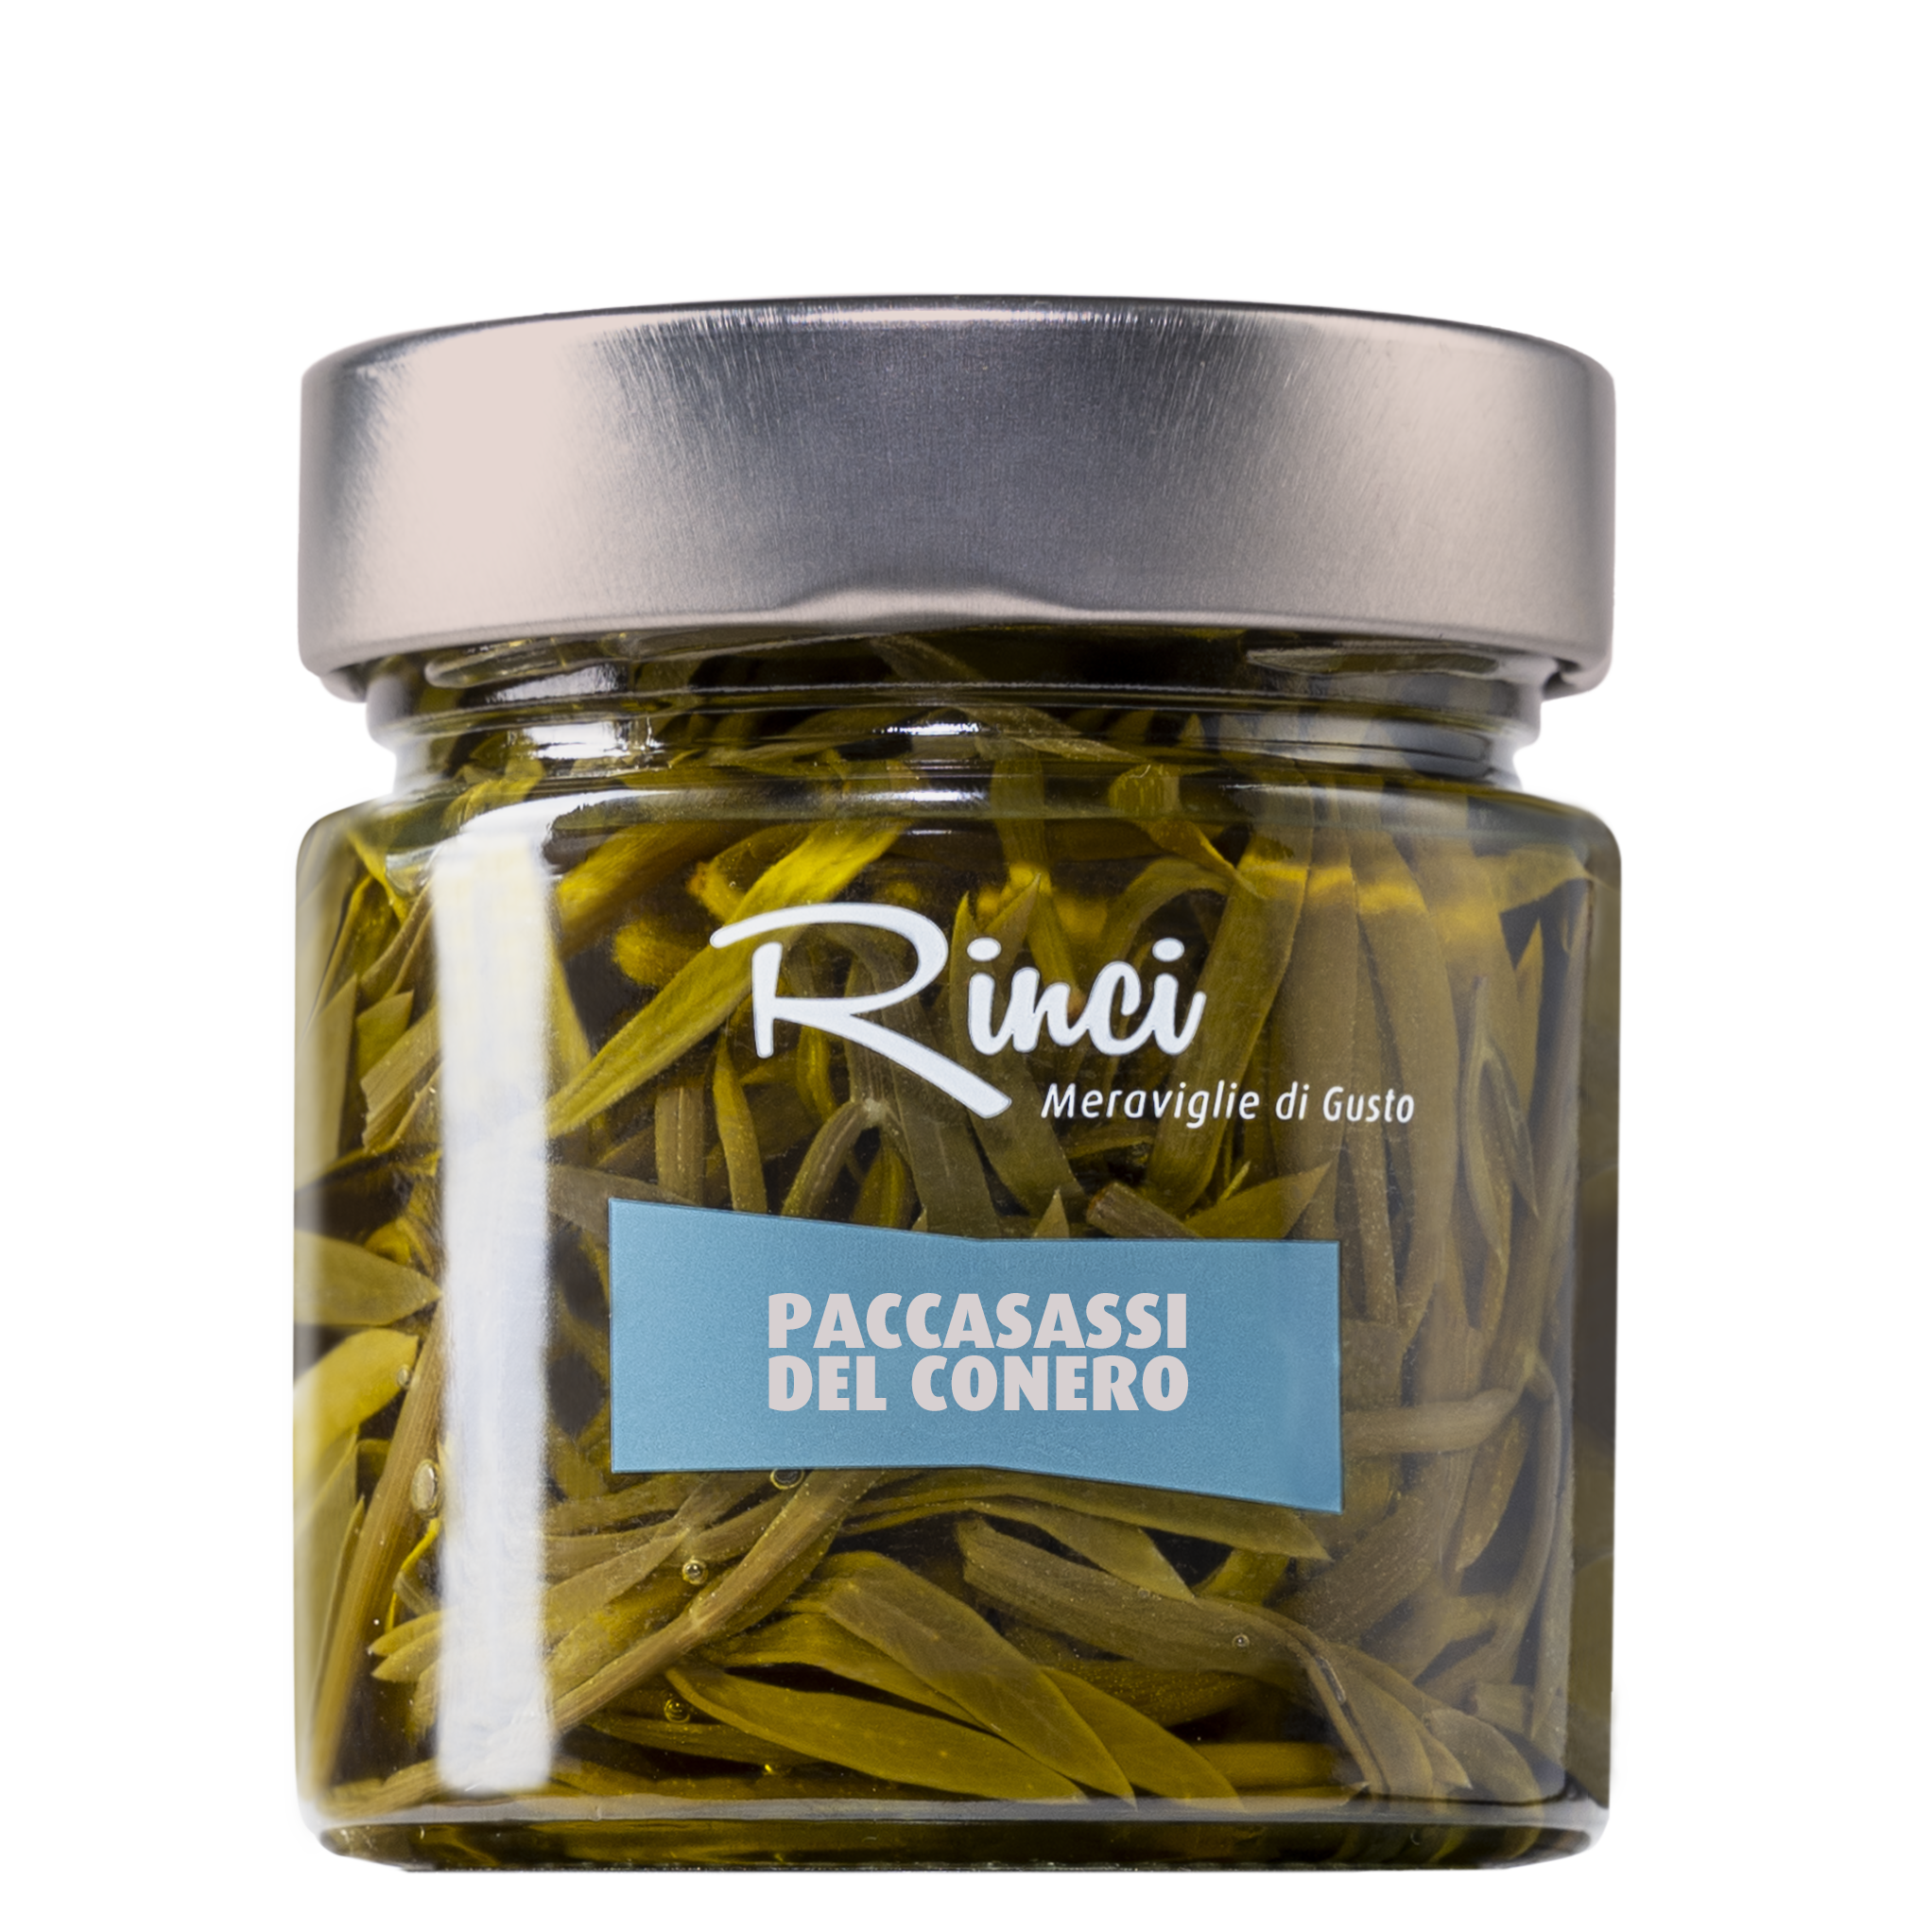 PACCASASSI (Sea Fennel) IN EXTRA VIRGIN OLIVE OIL